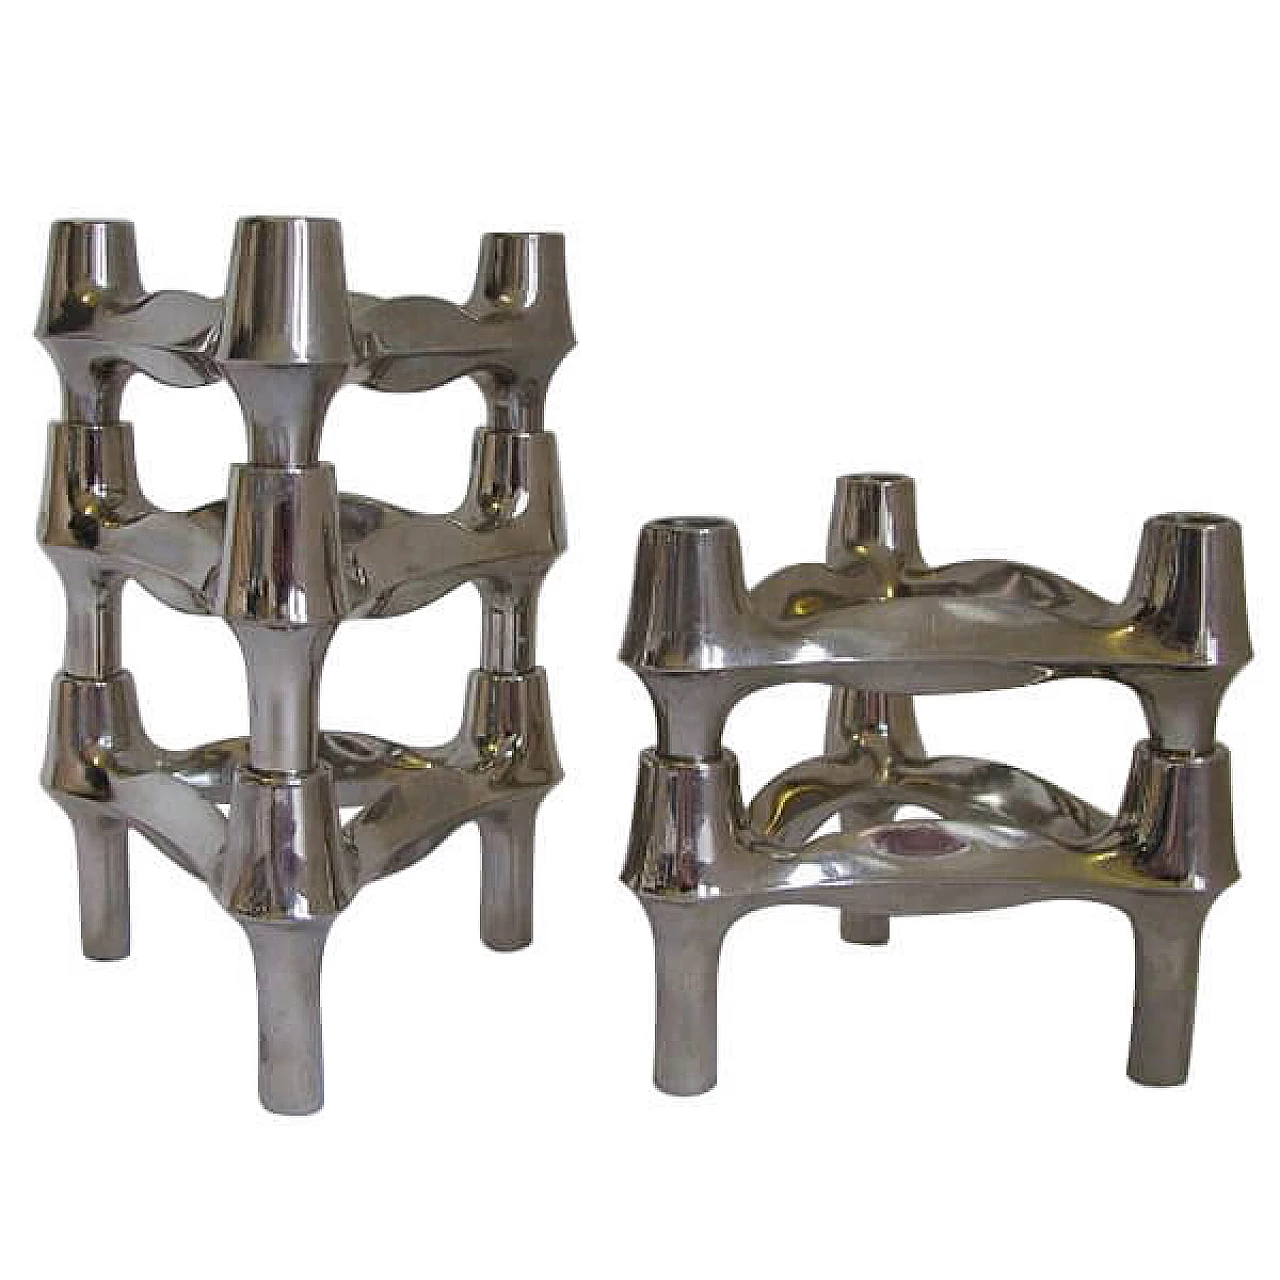 5 modular candleholders by Fritz Nagel and Ceasar Stoffi for BMF, 70s 1219054